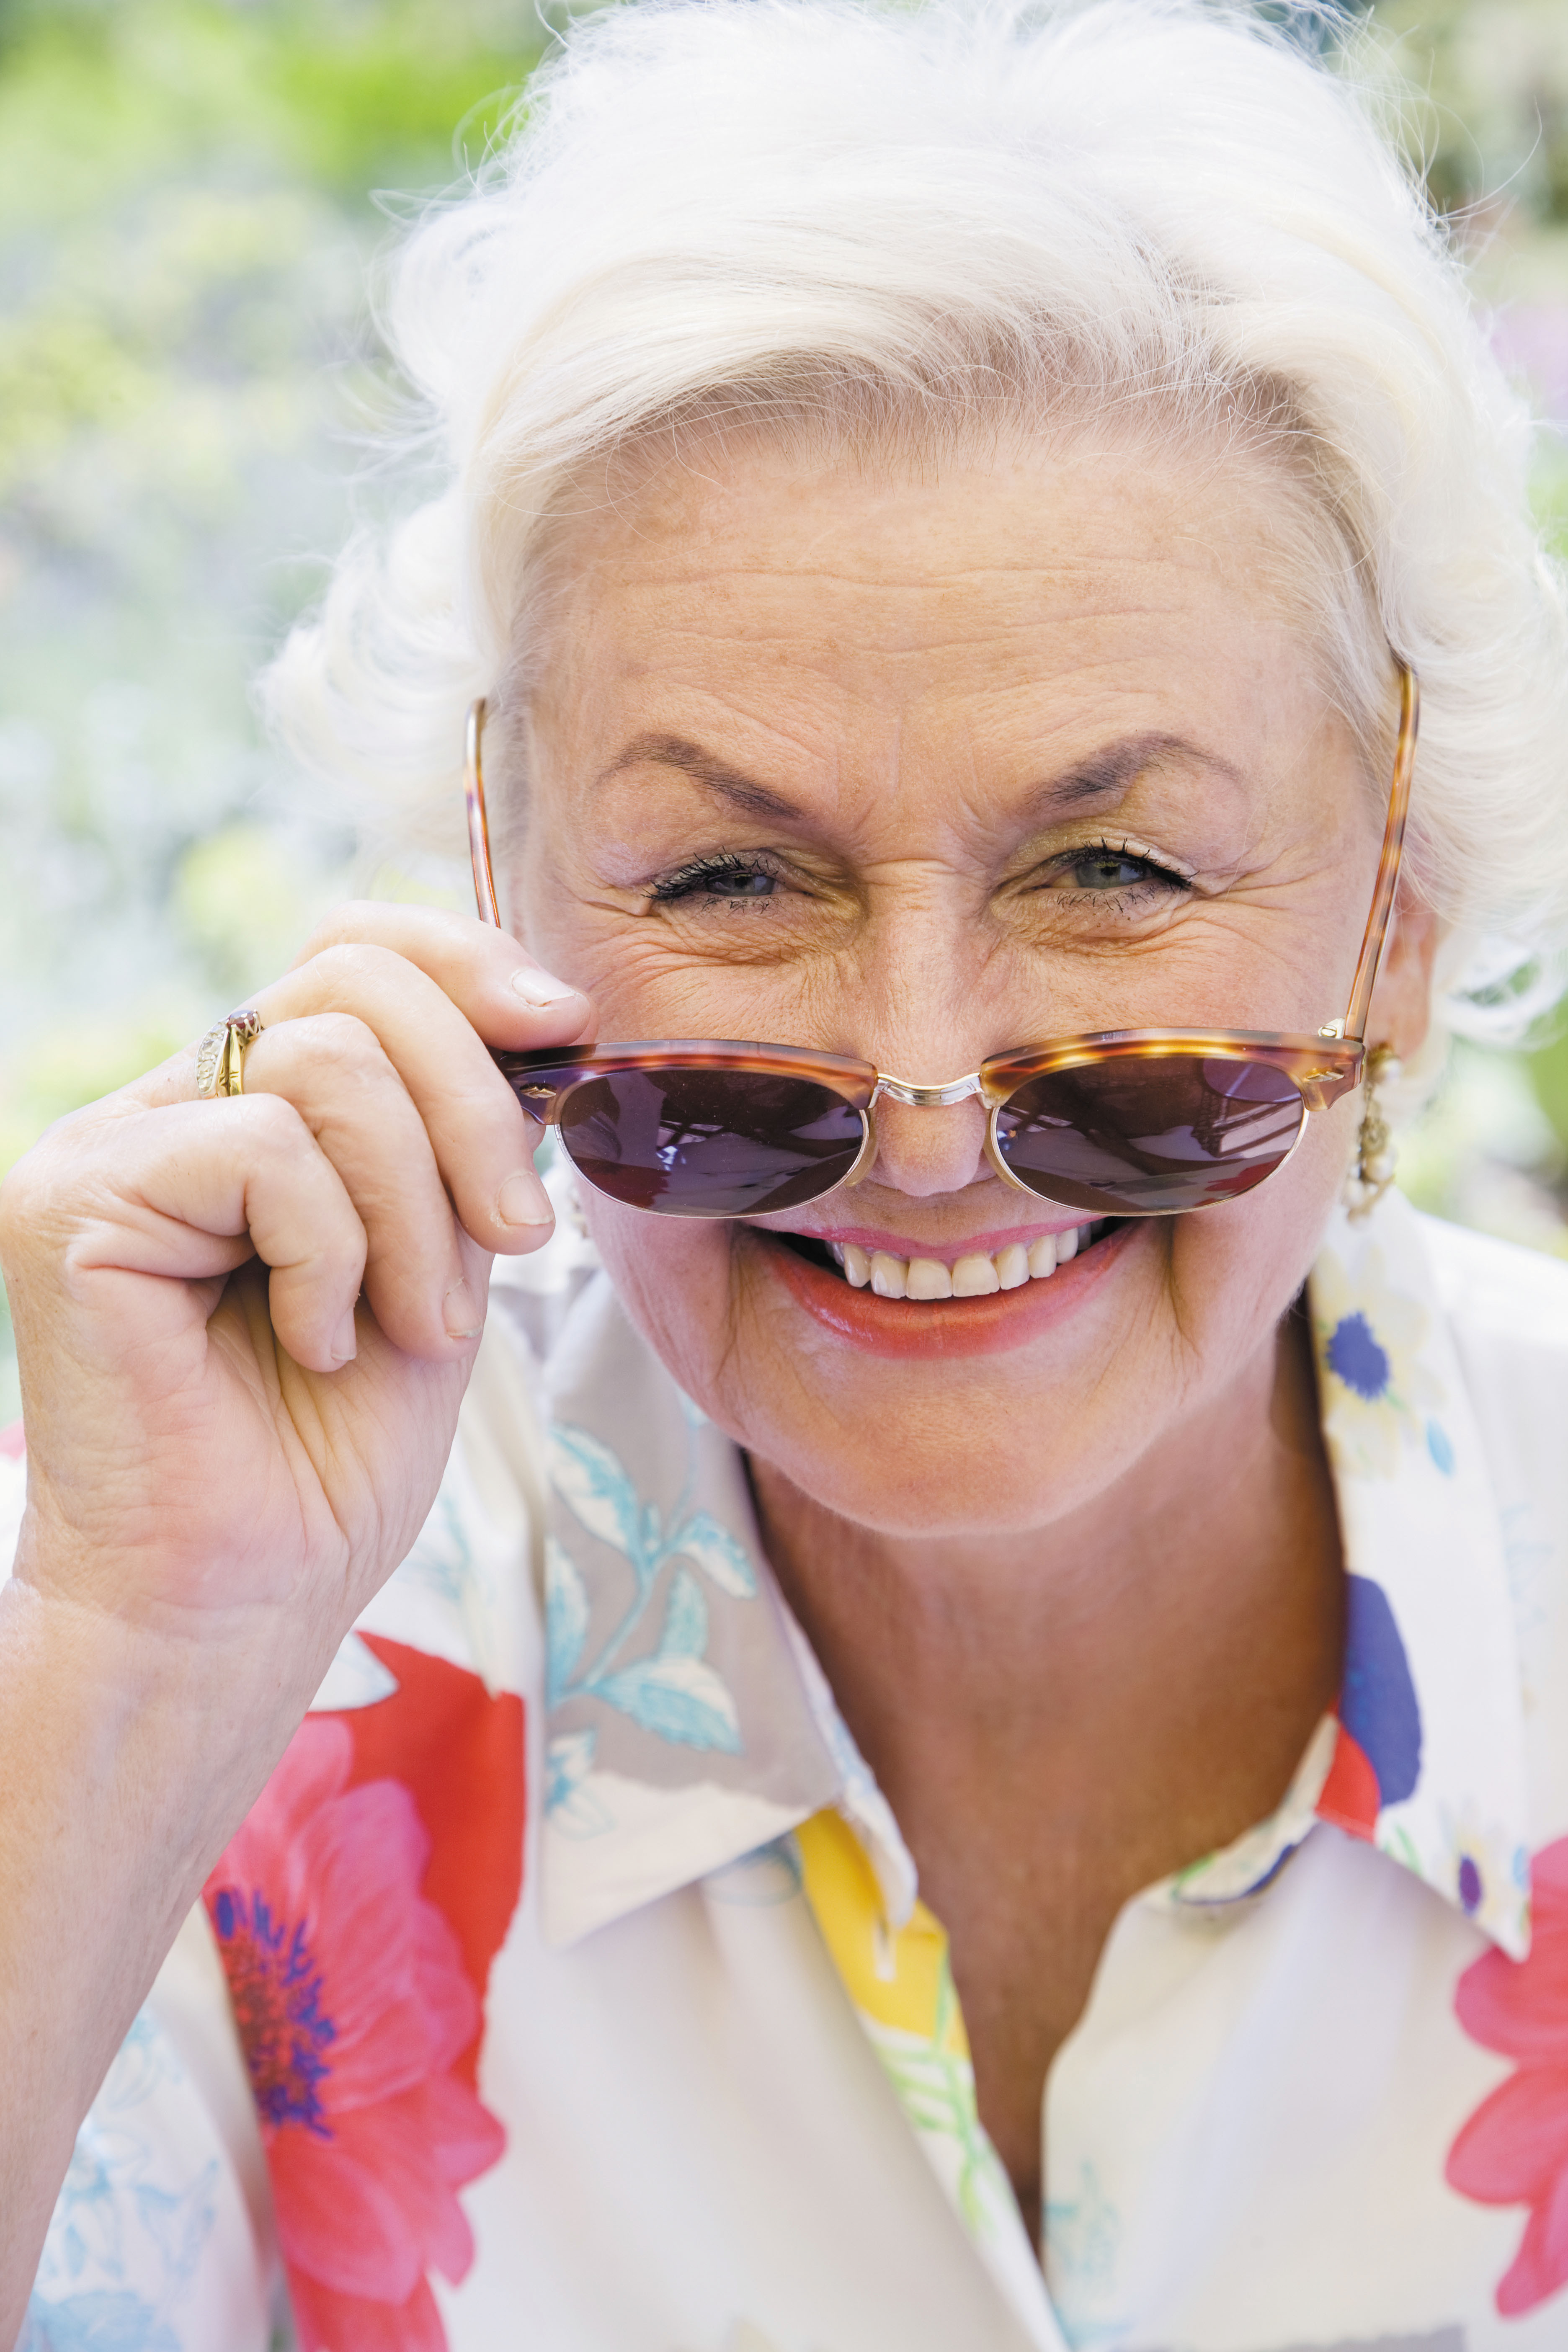 photo of a smiling older woman holding sunglasses that have been pulled down her nose so her eyes are visible